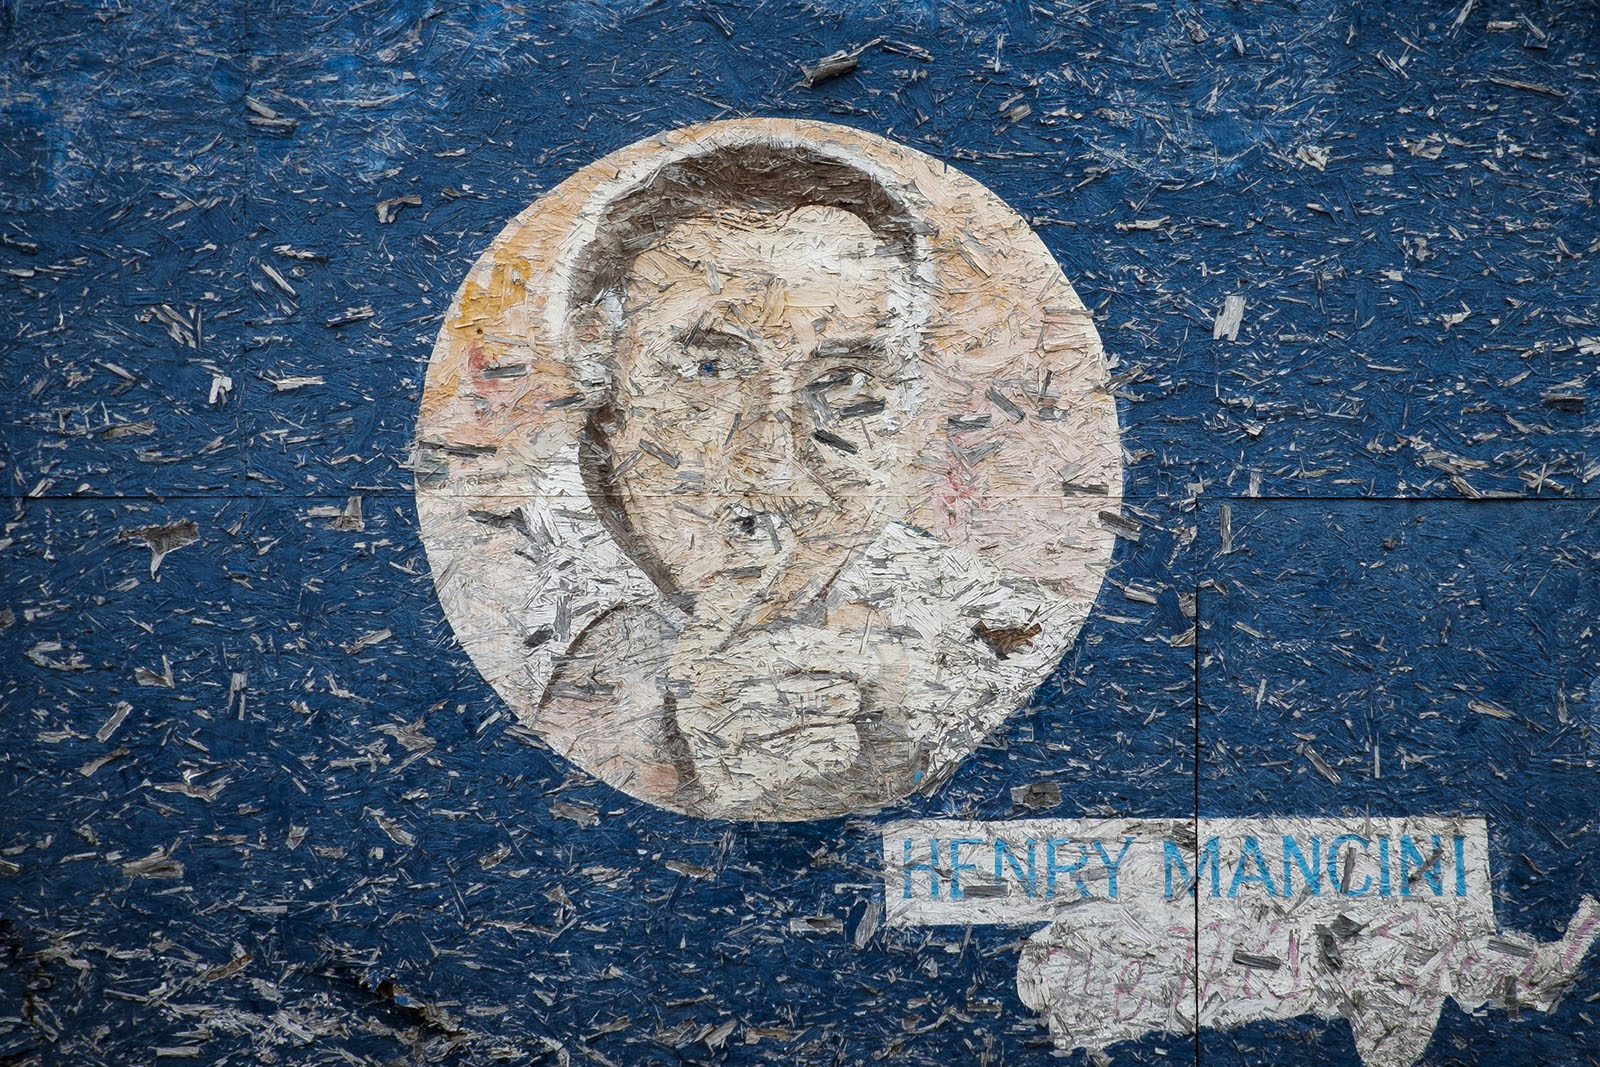 A faded mural: a tribute to composer Henry Mancini.